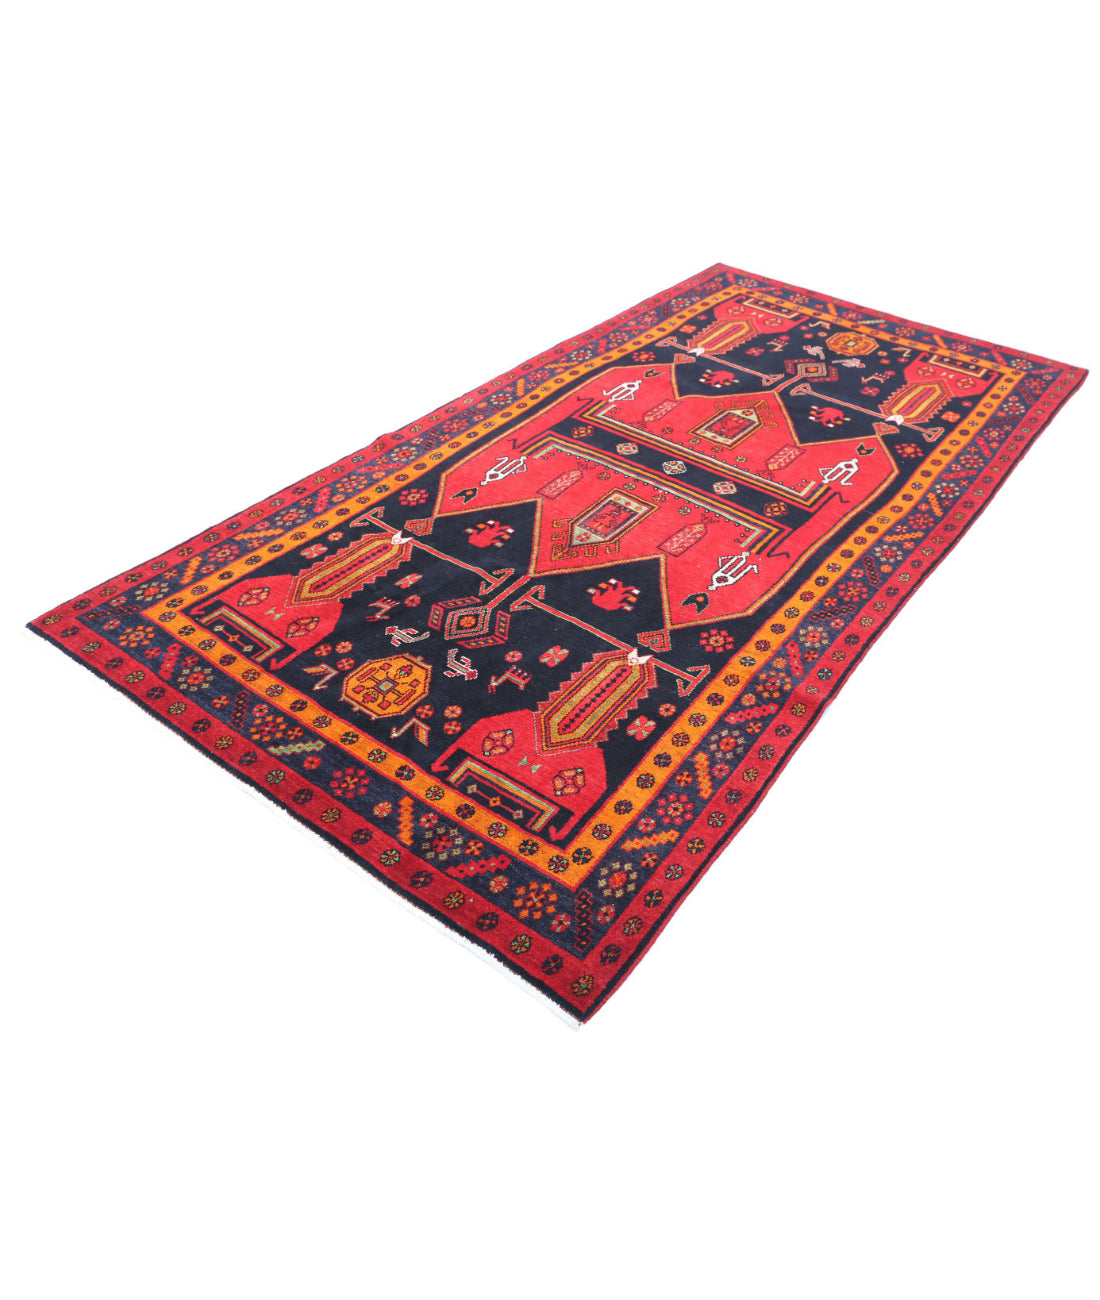 Hand Knotted Persian Hamadan Wool Rug - 4'9'' x 9'7'' 4'9'' x 9'7'' (143 X 288) / Red / Blue